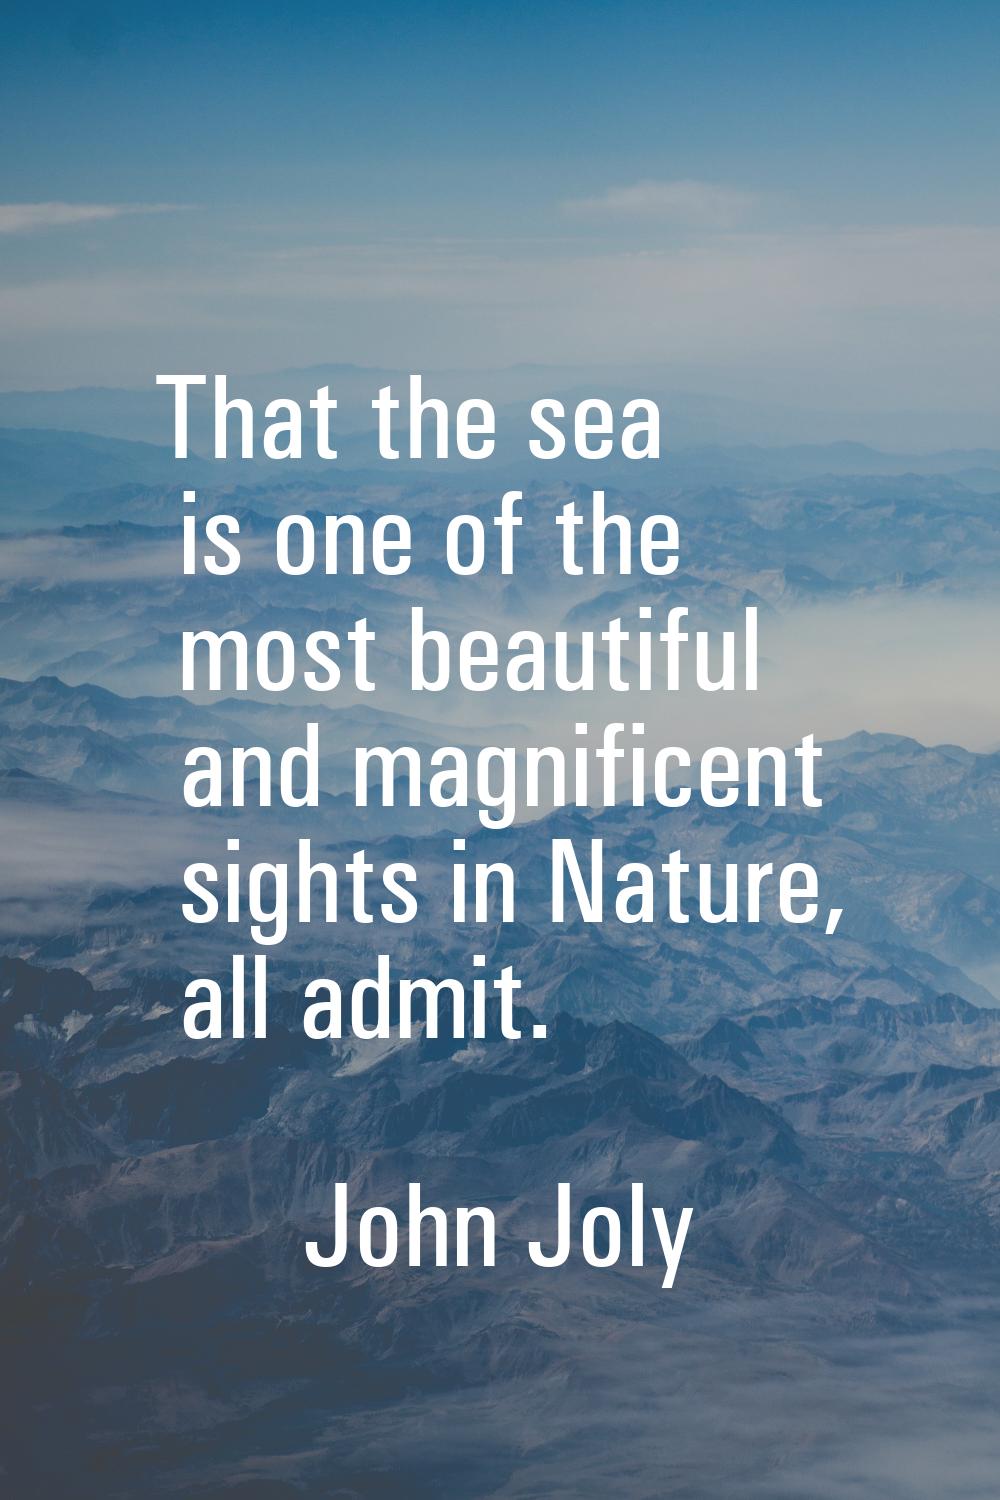 That the sea is one of the most beautiful and magnificent sights in Nature, all admit.